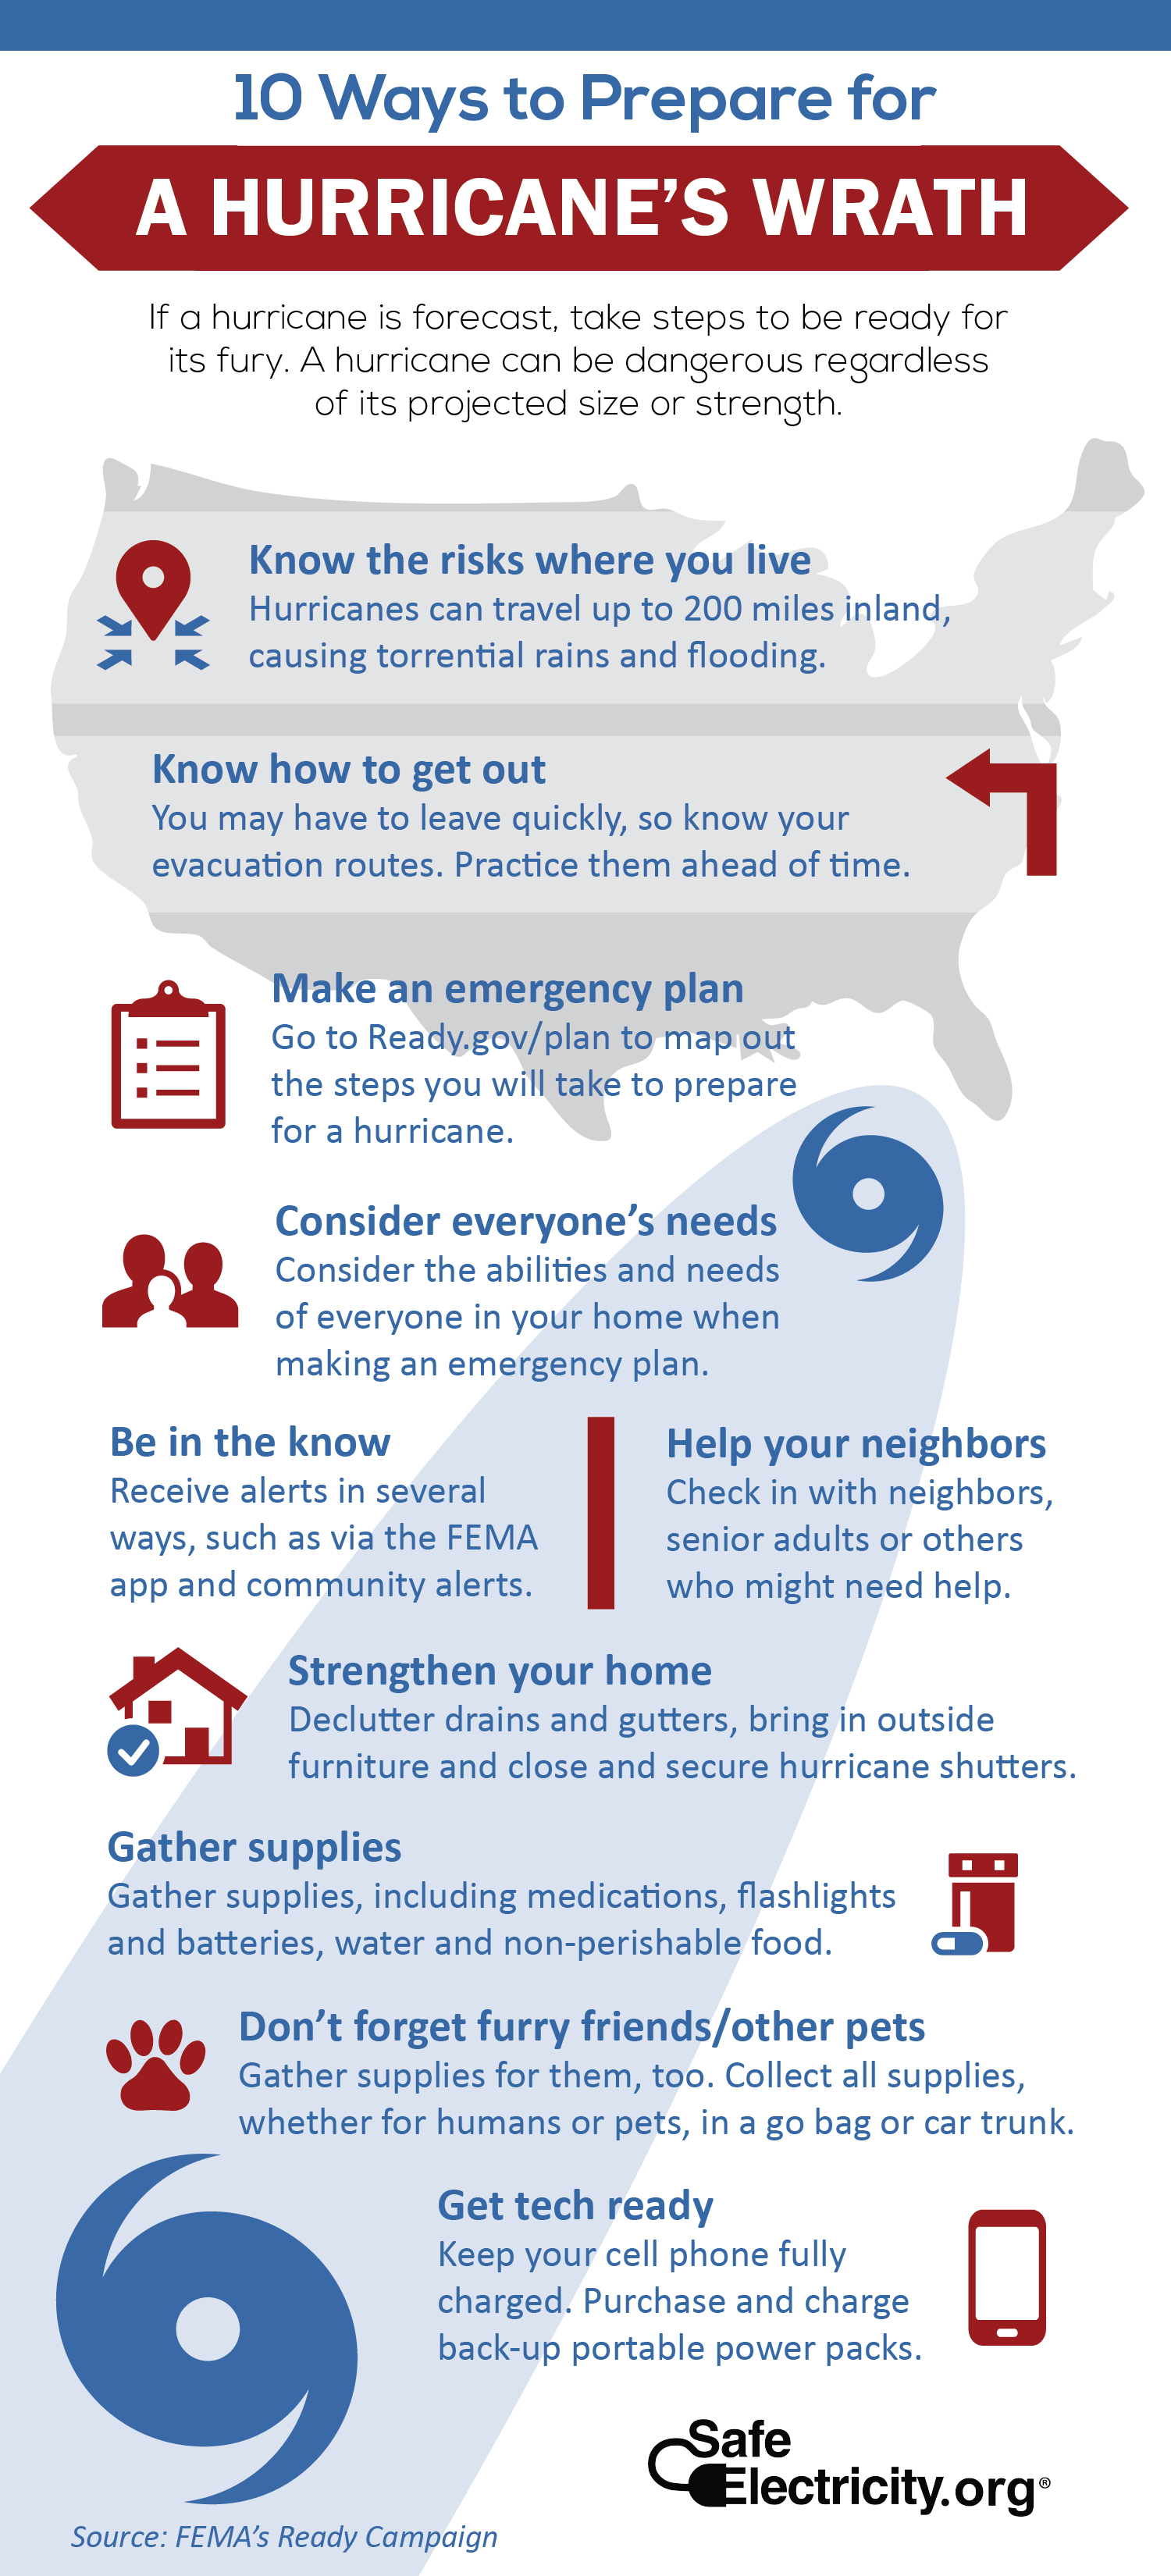 10 Ways to Prepare for a Hurricane